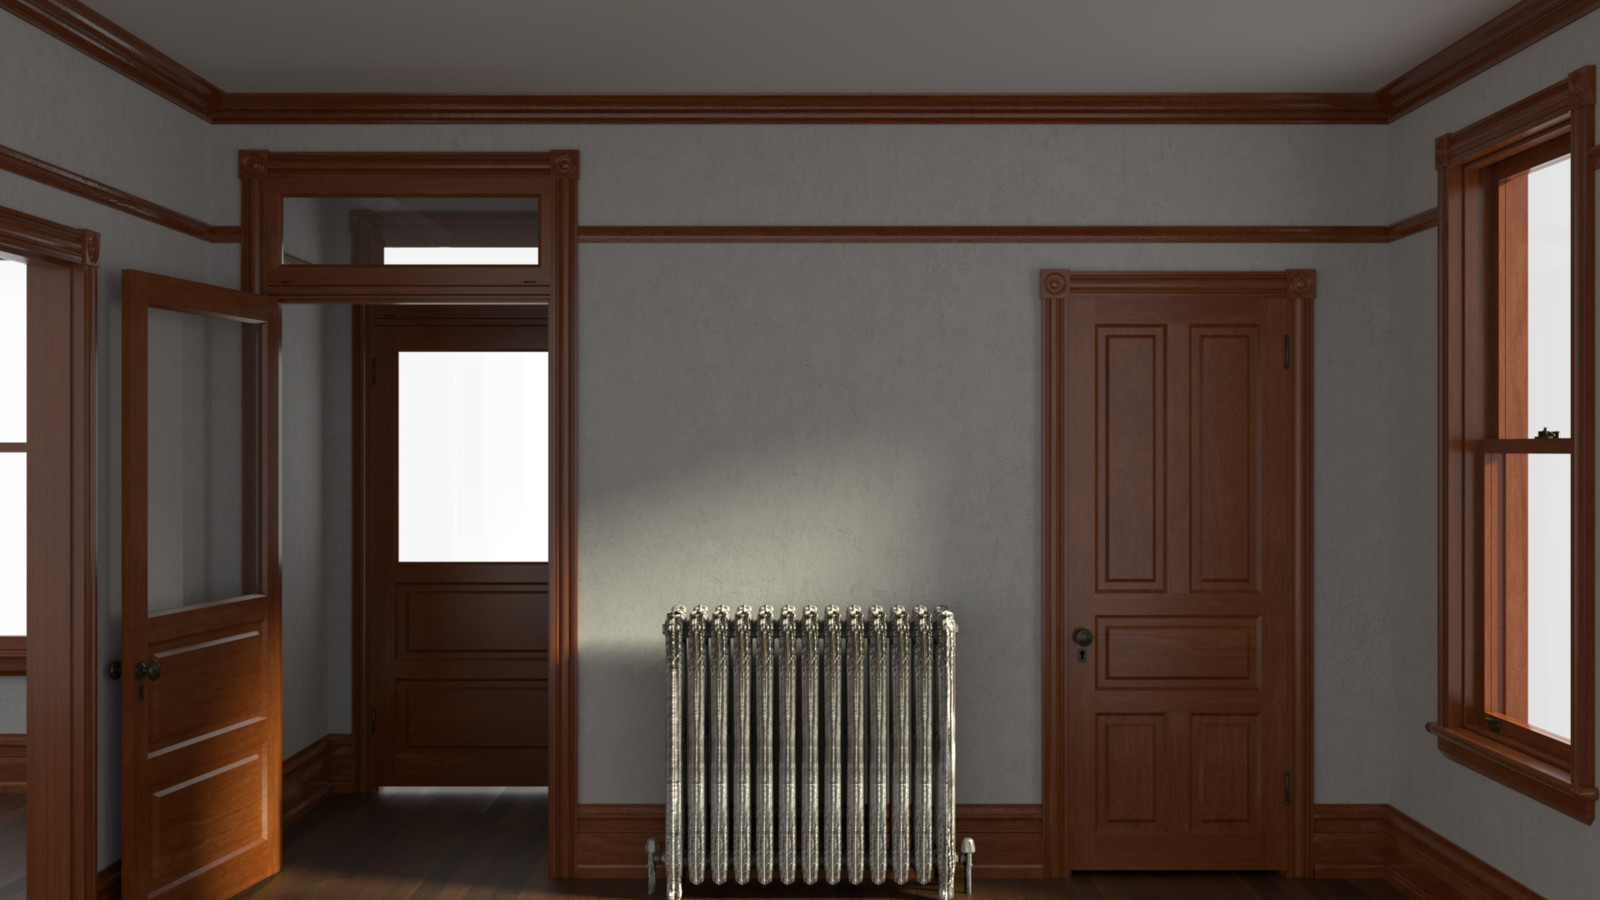 I modeled this room after my own foyer. It uses both this door set and the window set mentioned in the project description. That radiator was a great accomplishment when I made it... oh well.